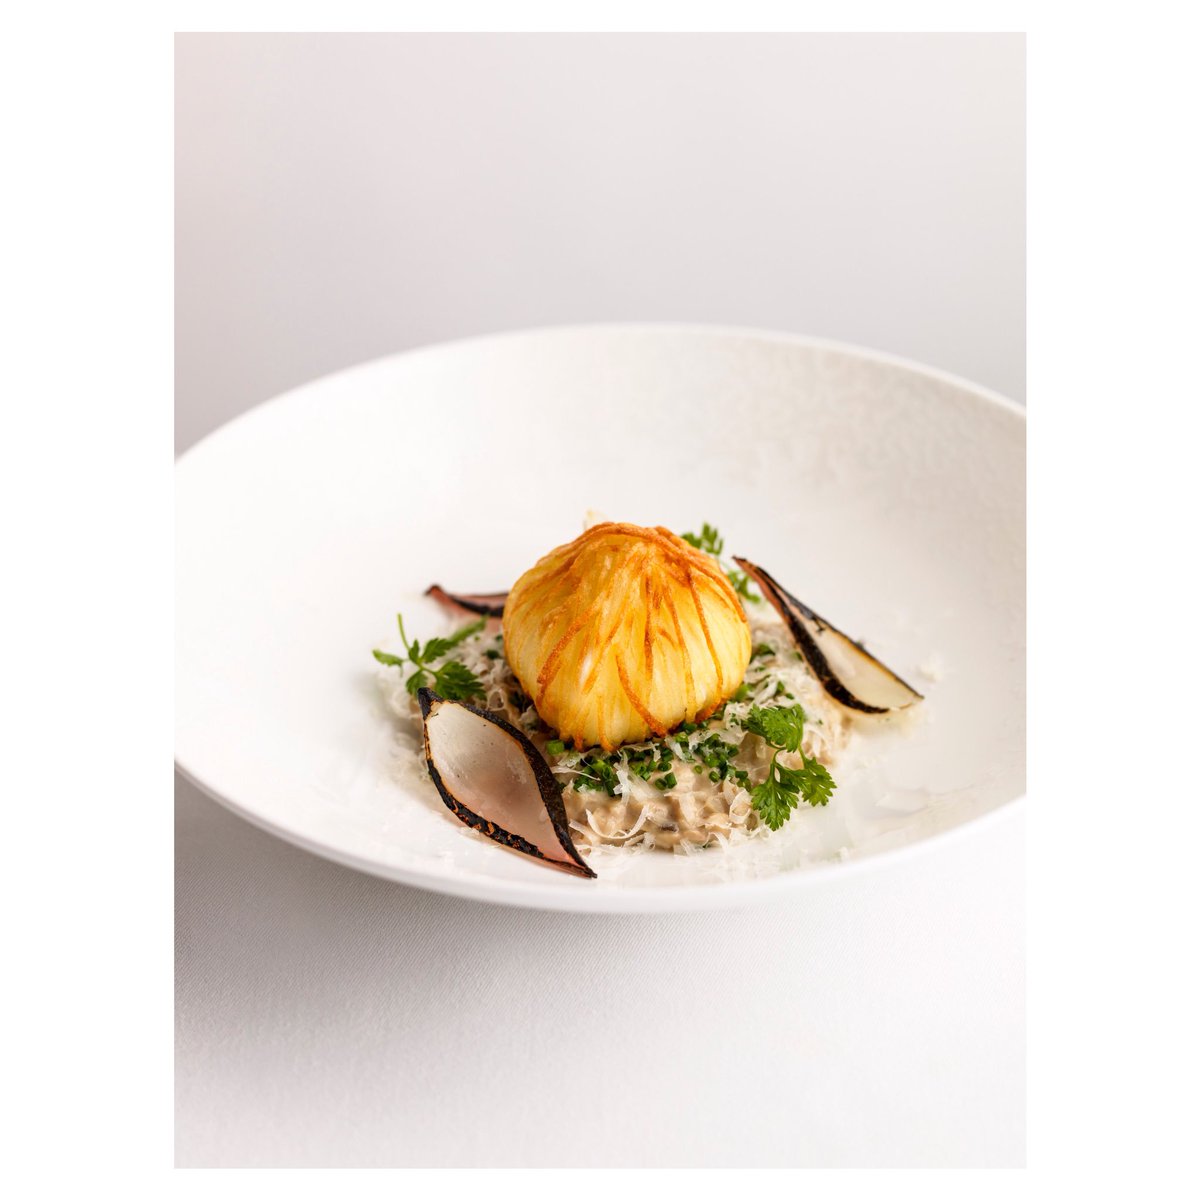 Good news, we’ve released more online tables! Also here’s our Claude’s Mushroom Risotto with Daniel’s Crispy Egg and Aged Parmesan #claudebosi #danielclifford #tomkerridge #london #kerridgesbarandgrill